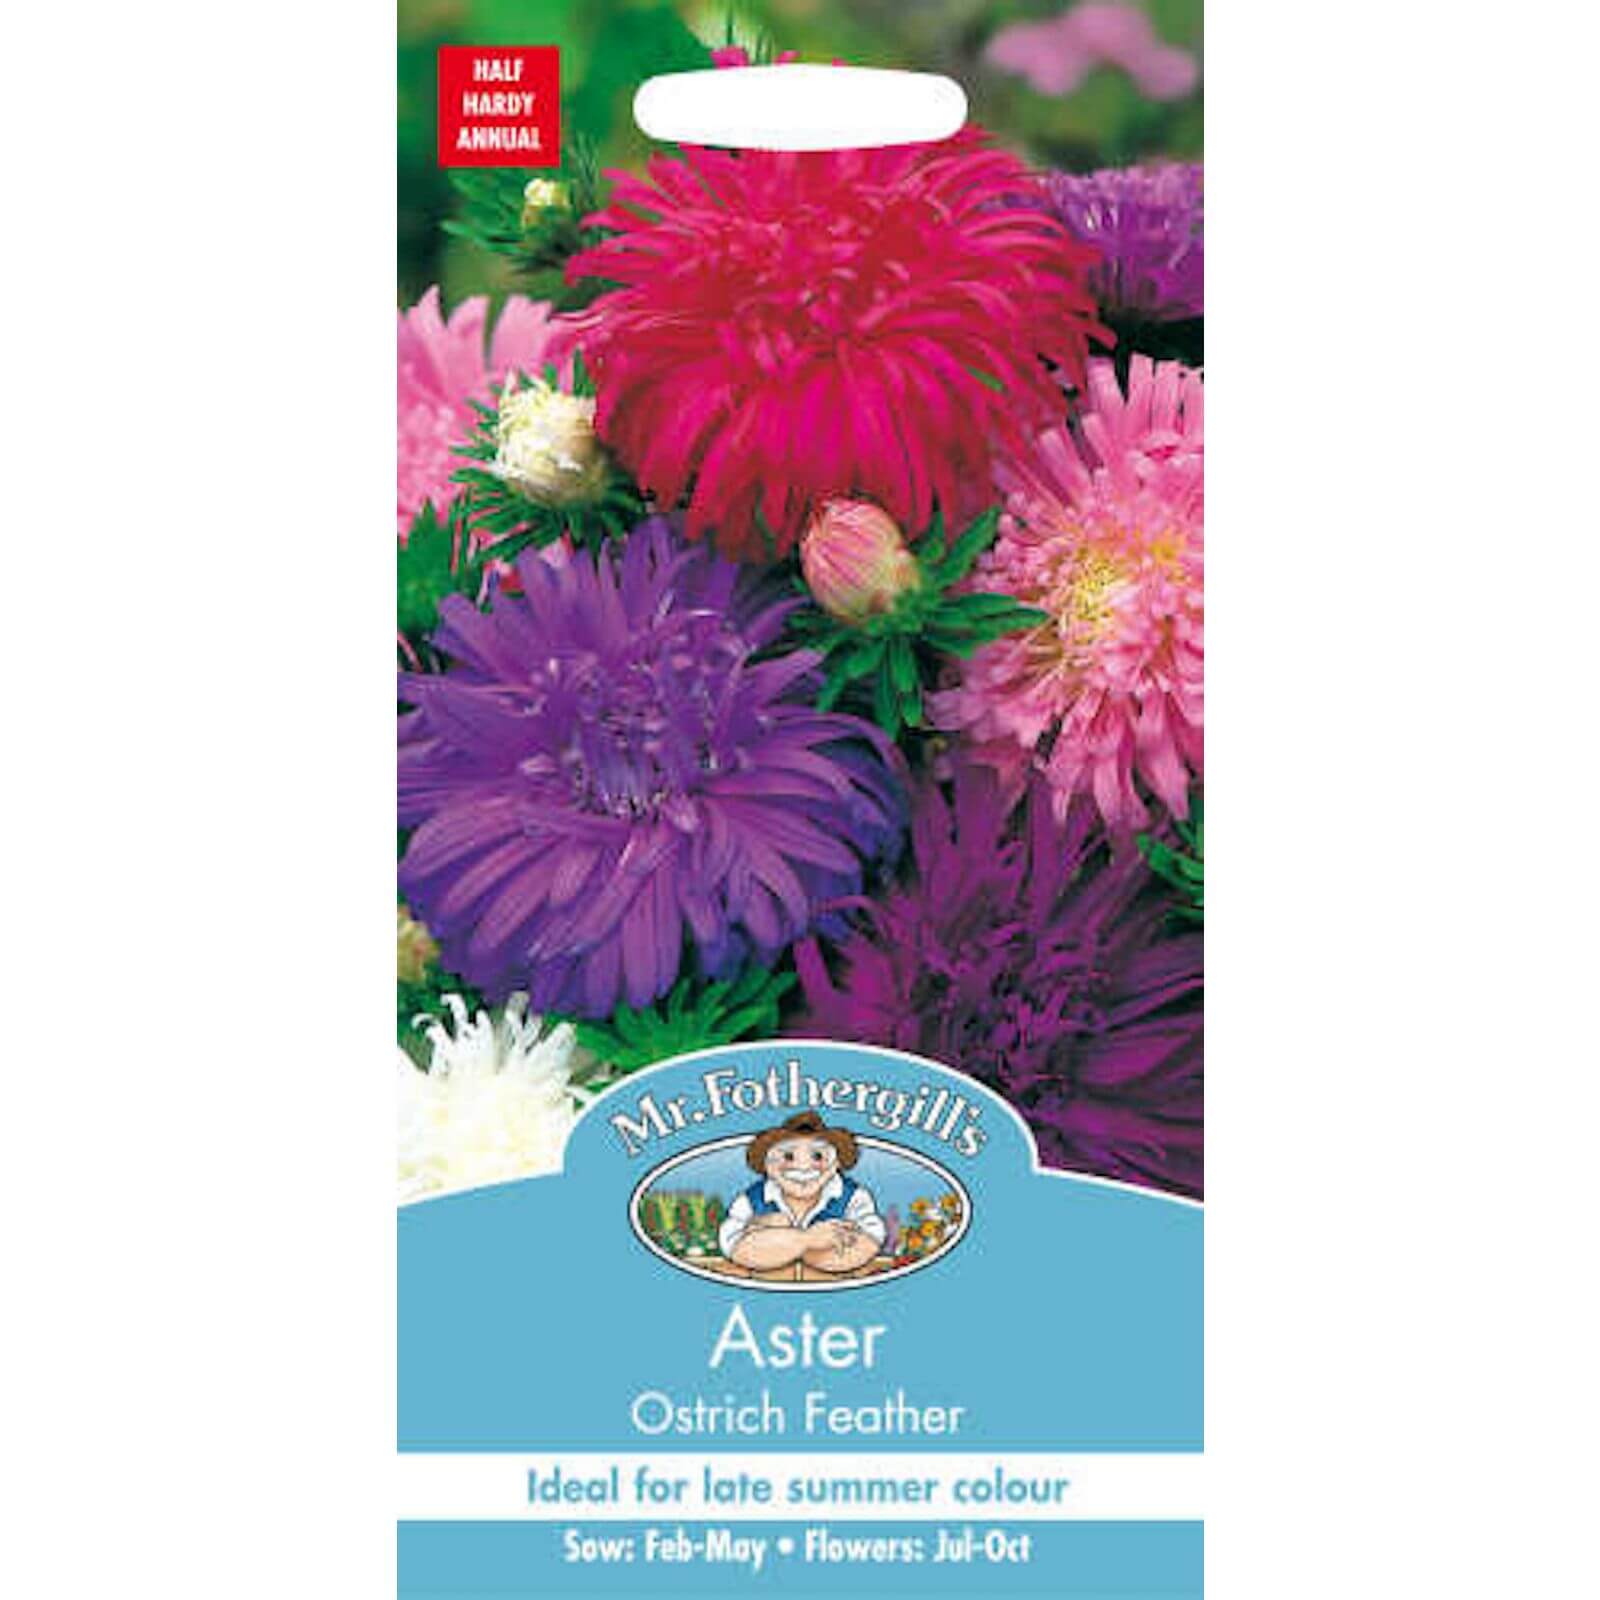 Mr. Fothergill's Aster Ostrich Feather Seeds